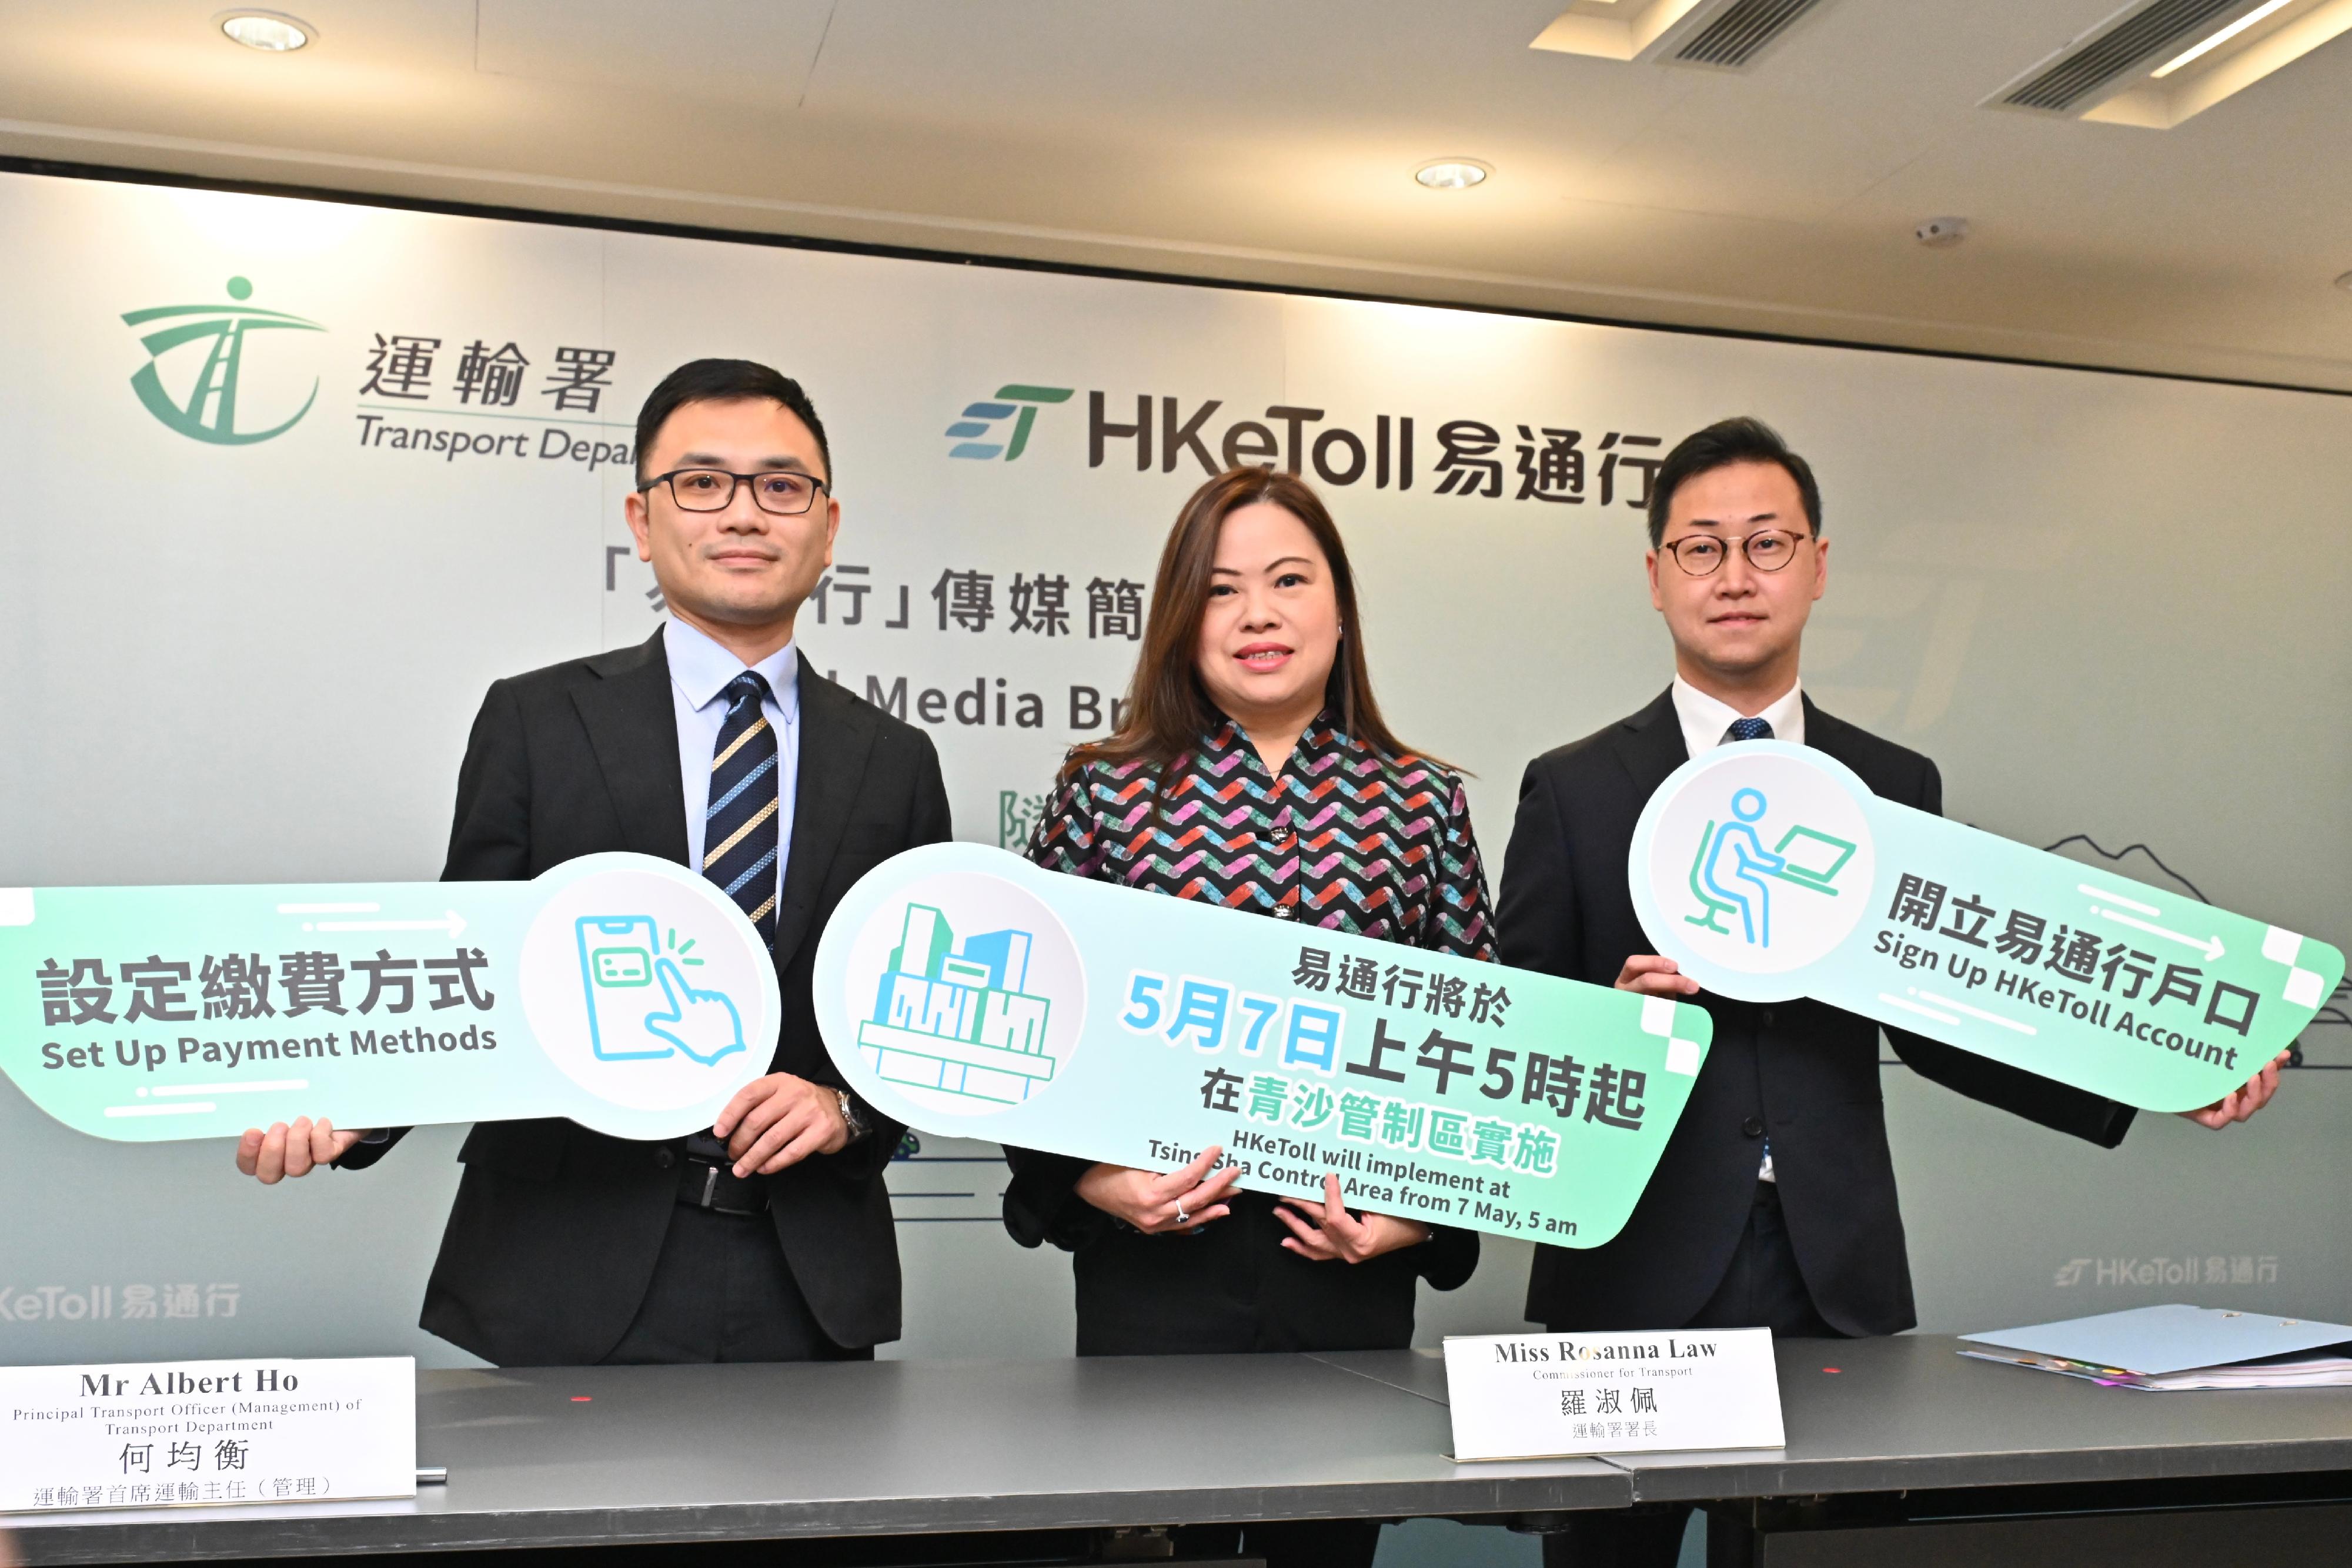 The Commissioner for Transport, Miss Rosanna Law (centre); the Principal Transport Officer (Management), Mr Albert Ho (left); and the Acting Chief Engineer (Smart Mobility), Mr George Fong (right), of the Transport Department (TD) held a briefing today (April 26) to introduce the implementation arrangements for the HKeToll in the Tsing Sha Control Area (Eagle’s Nest Tunnel, Sha Tin Heights Tunnel and Tai Wai Tunnel) from 5am on May 7 to replace all manual toll booths and Autotoll lanes. Motorists can pay tunnel tolls using toll tags without having to stop or queue at toll booths for payments.